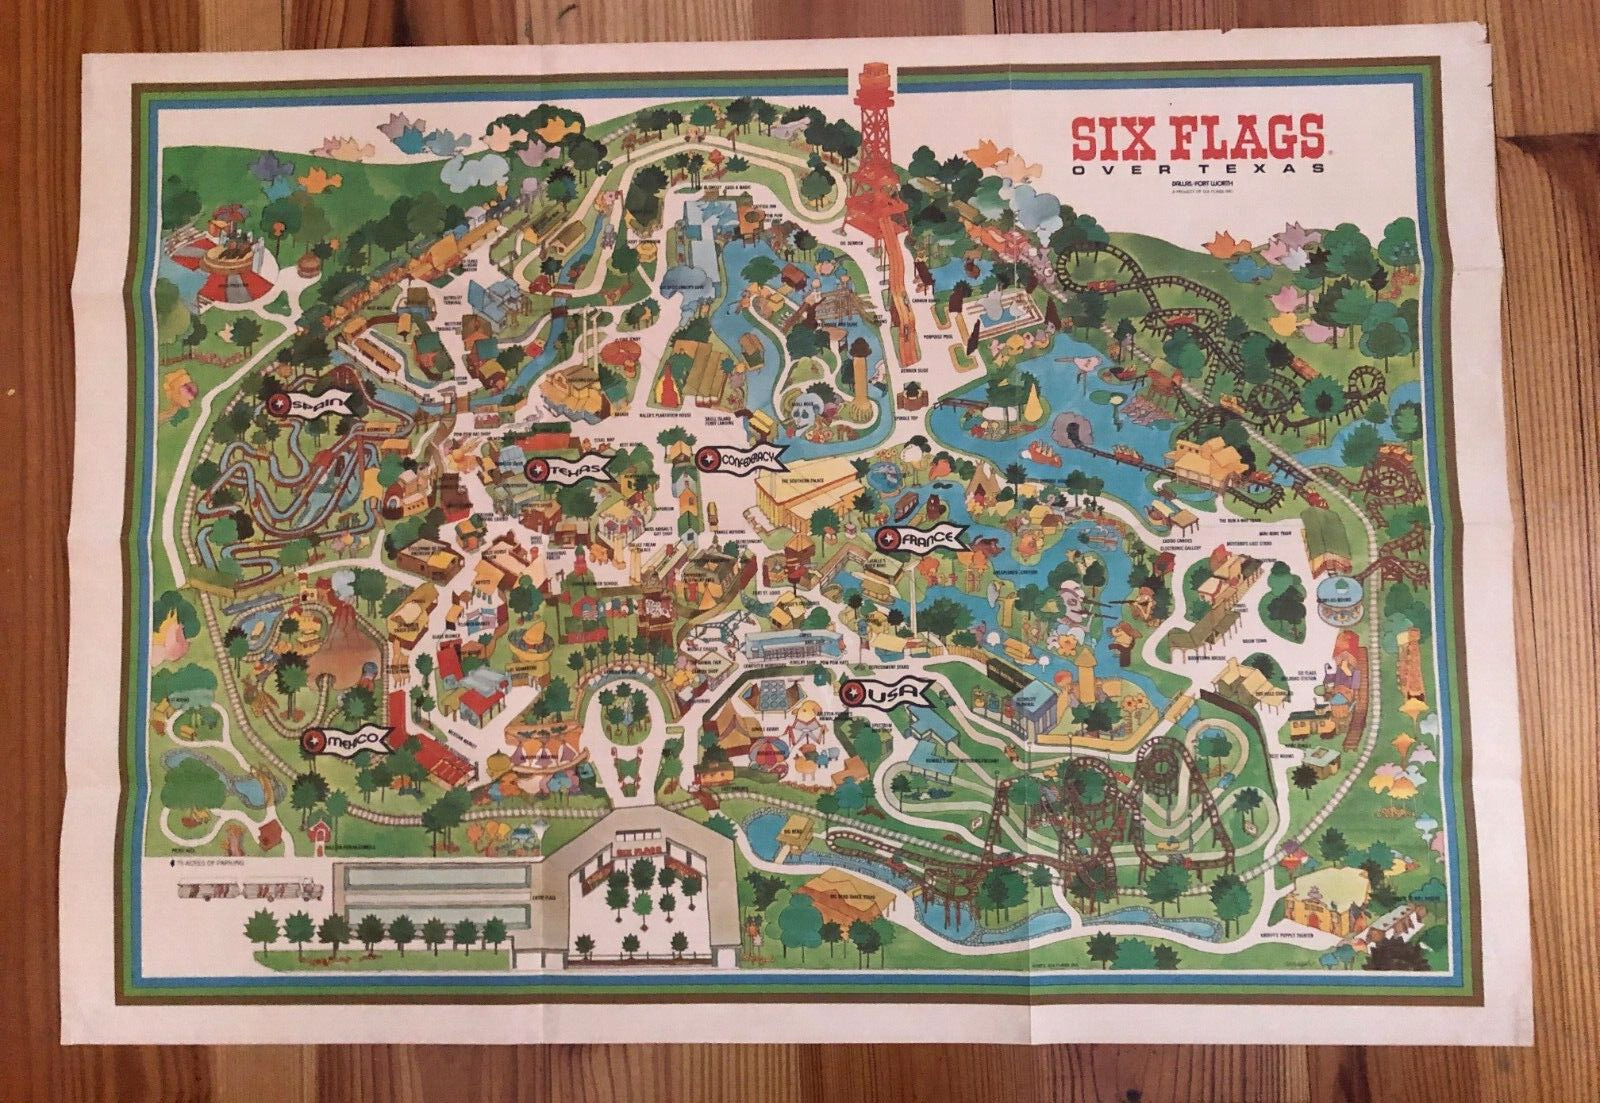 Six Flags Over Texas Dallas/Fort Worth Souvenir Map/Poster 1972